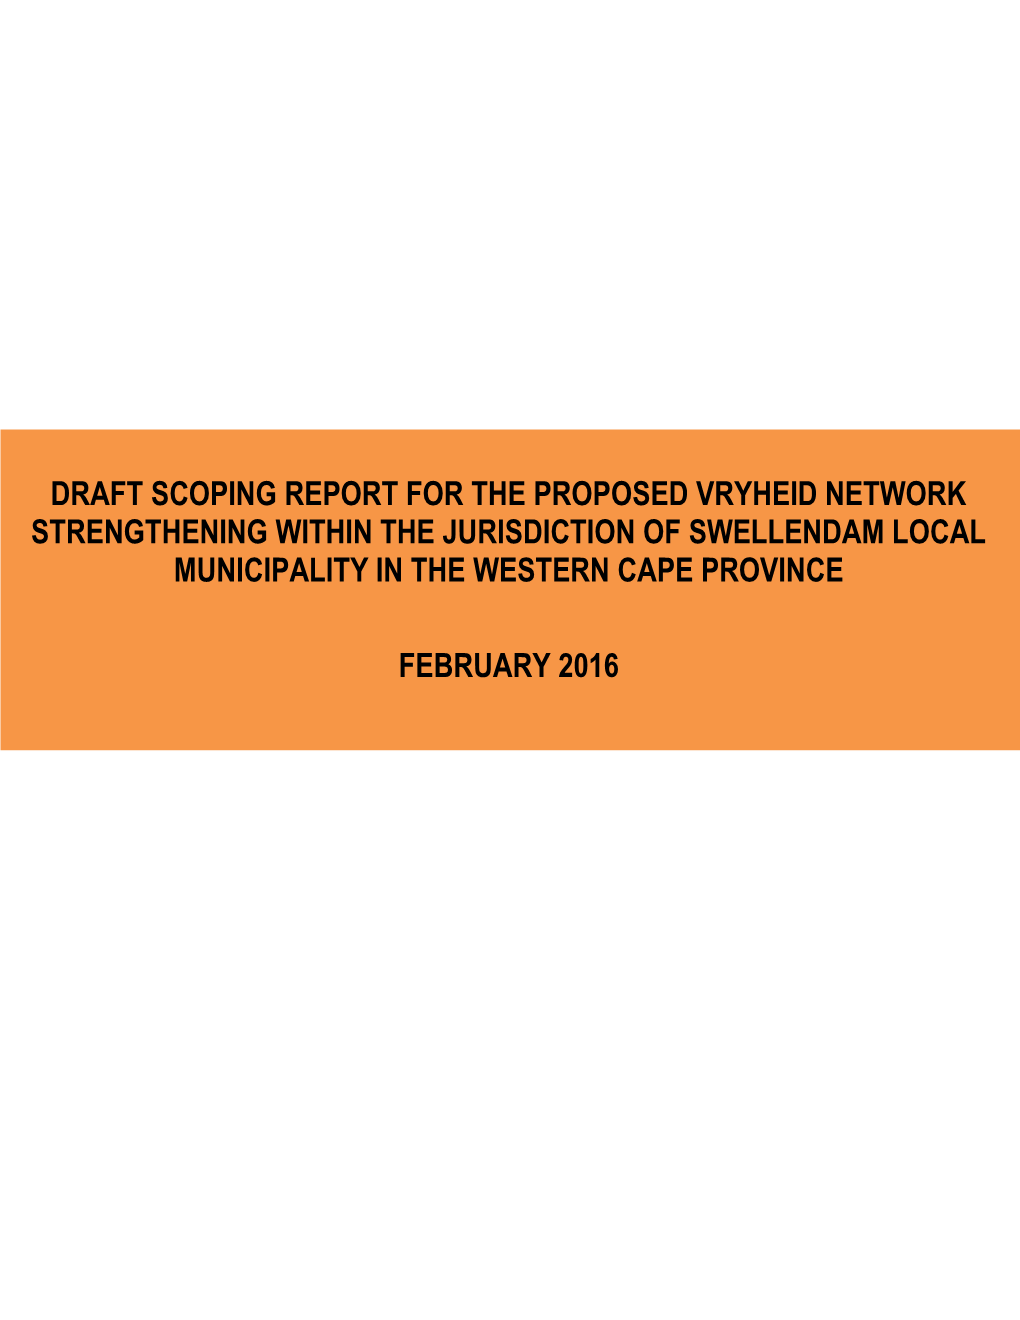 Draft Scoping Report for the Proposed Vryheid Network Strengthening Within the Jurisdiction of Swellendam Local Municipality in the Western Cape Province